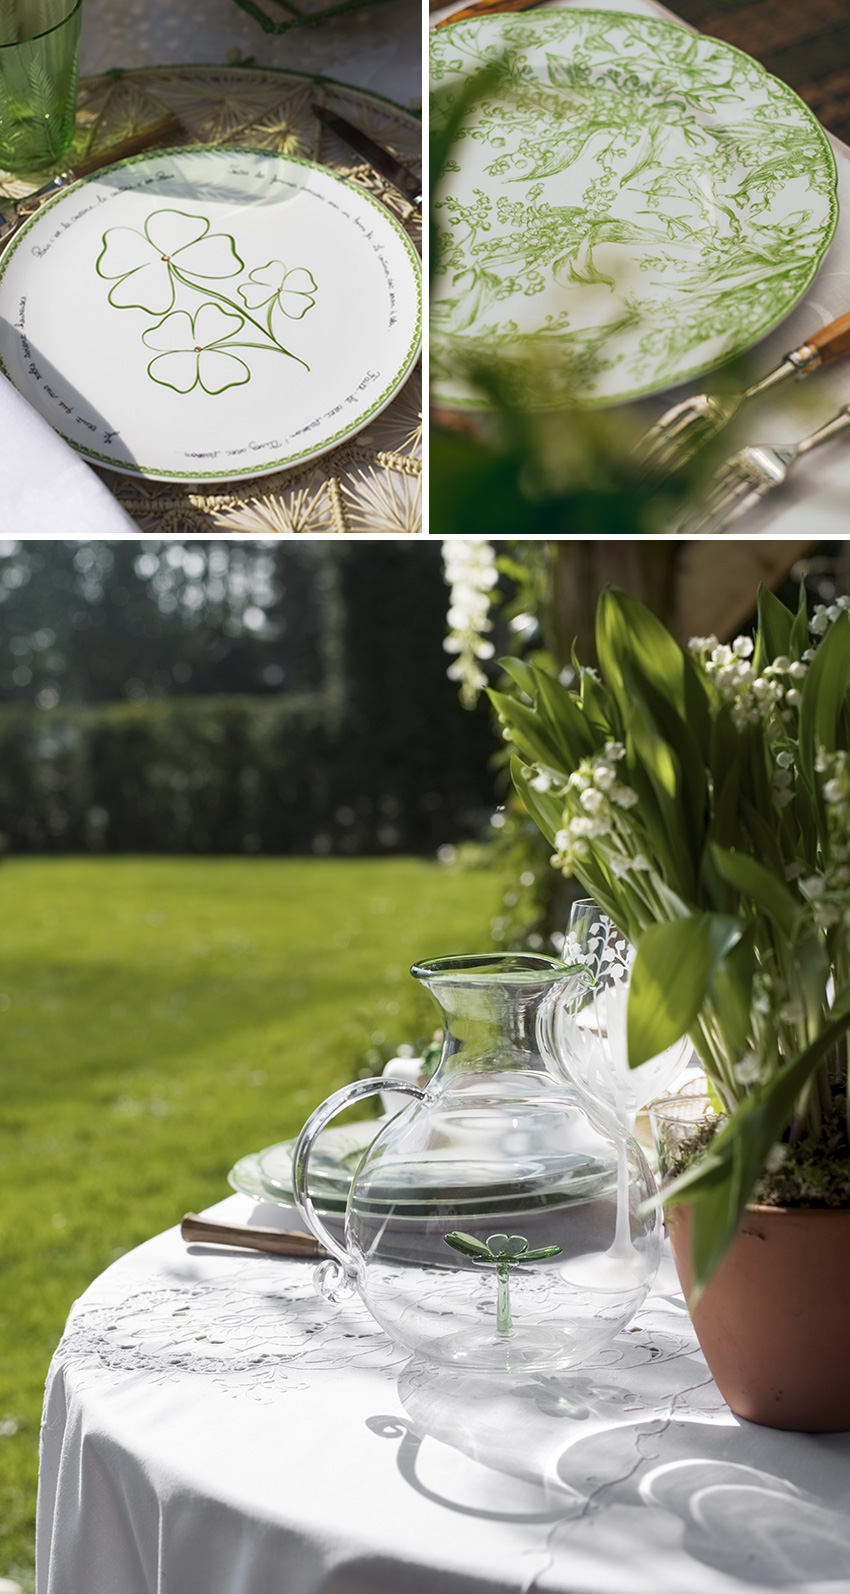 Dior Maison Lilly of the Valley tableware designed by Cordelia de Castellane